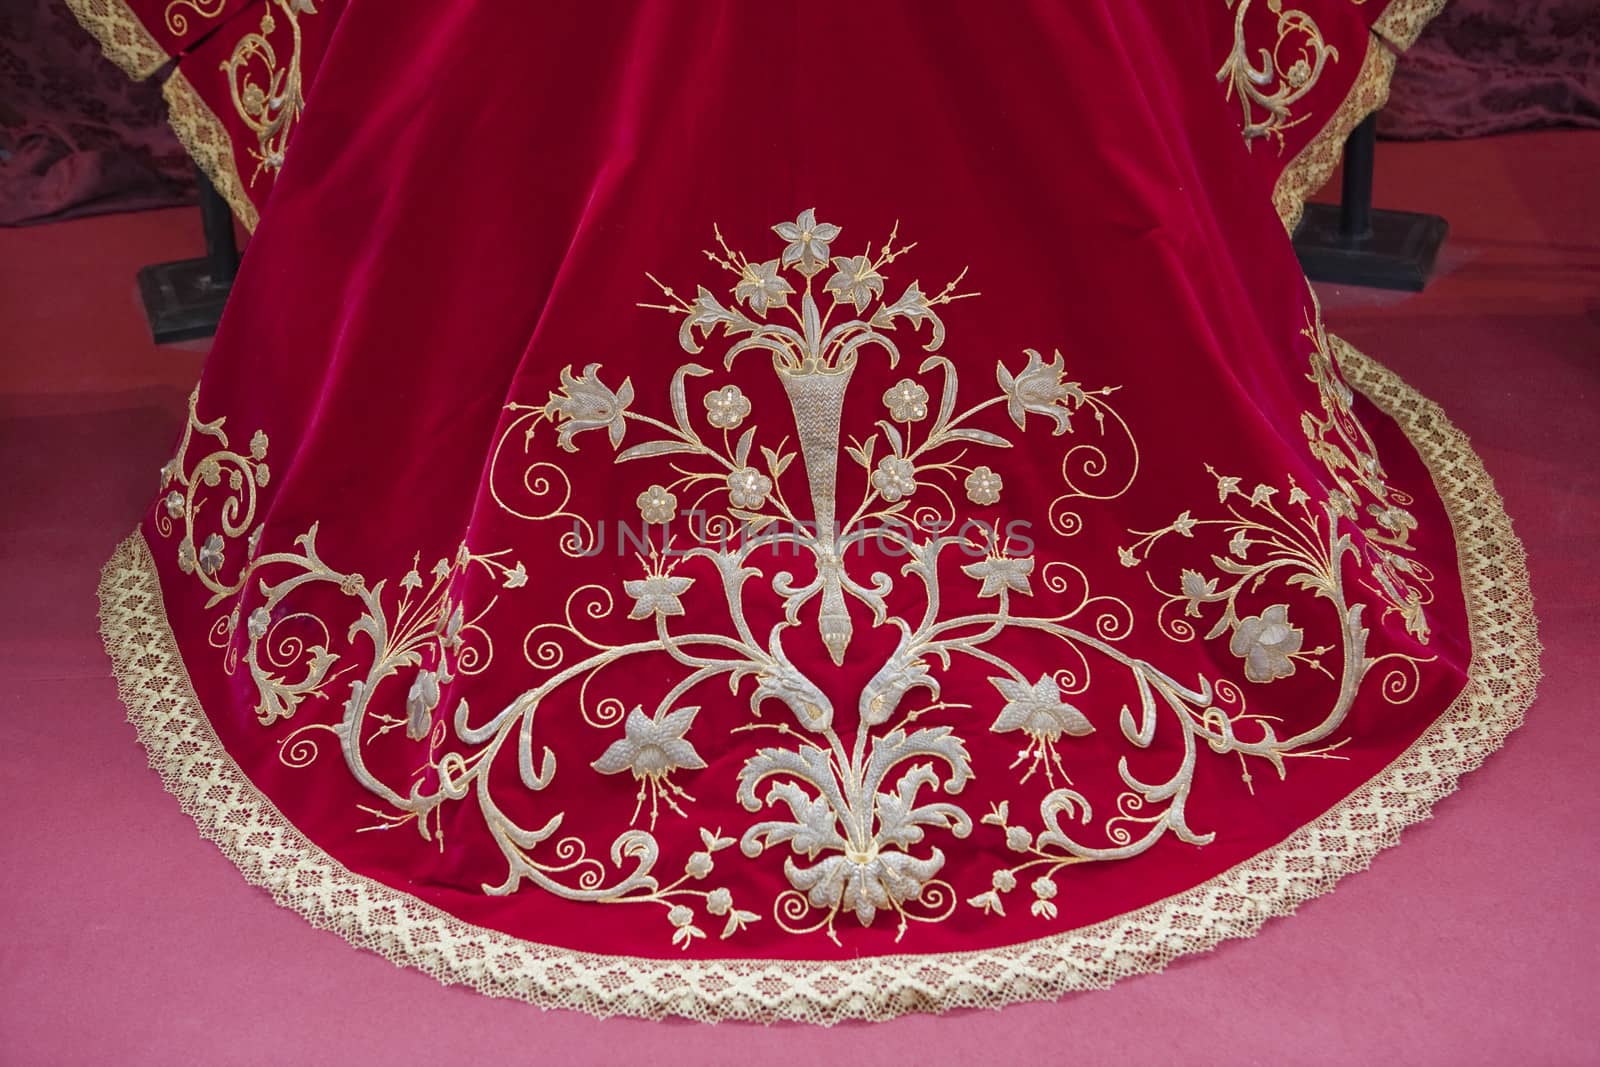 Embroidering with gold thread work on red velvet, Spain